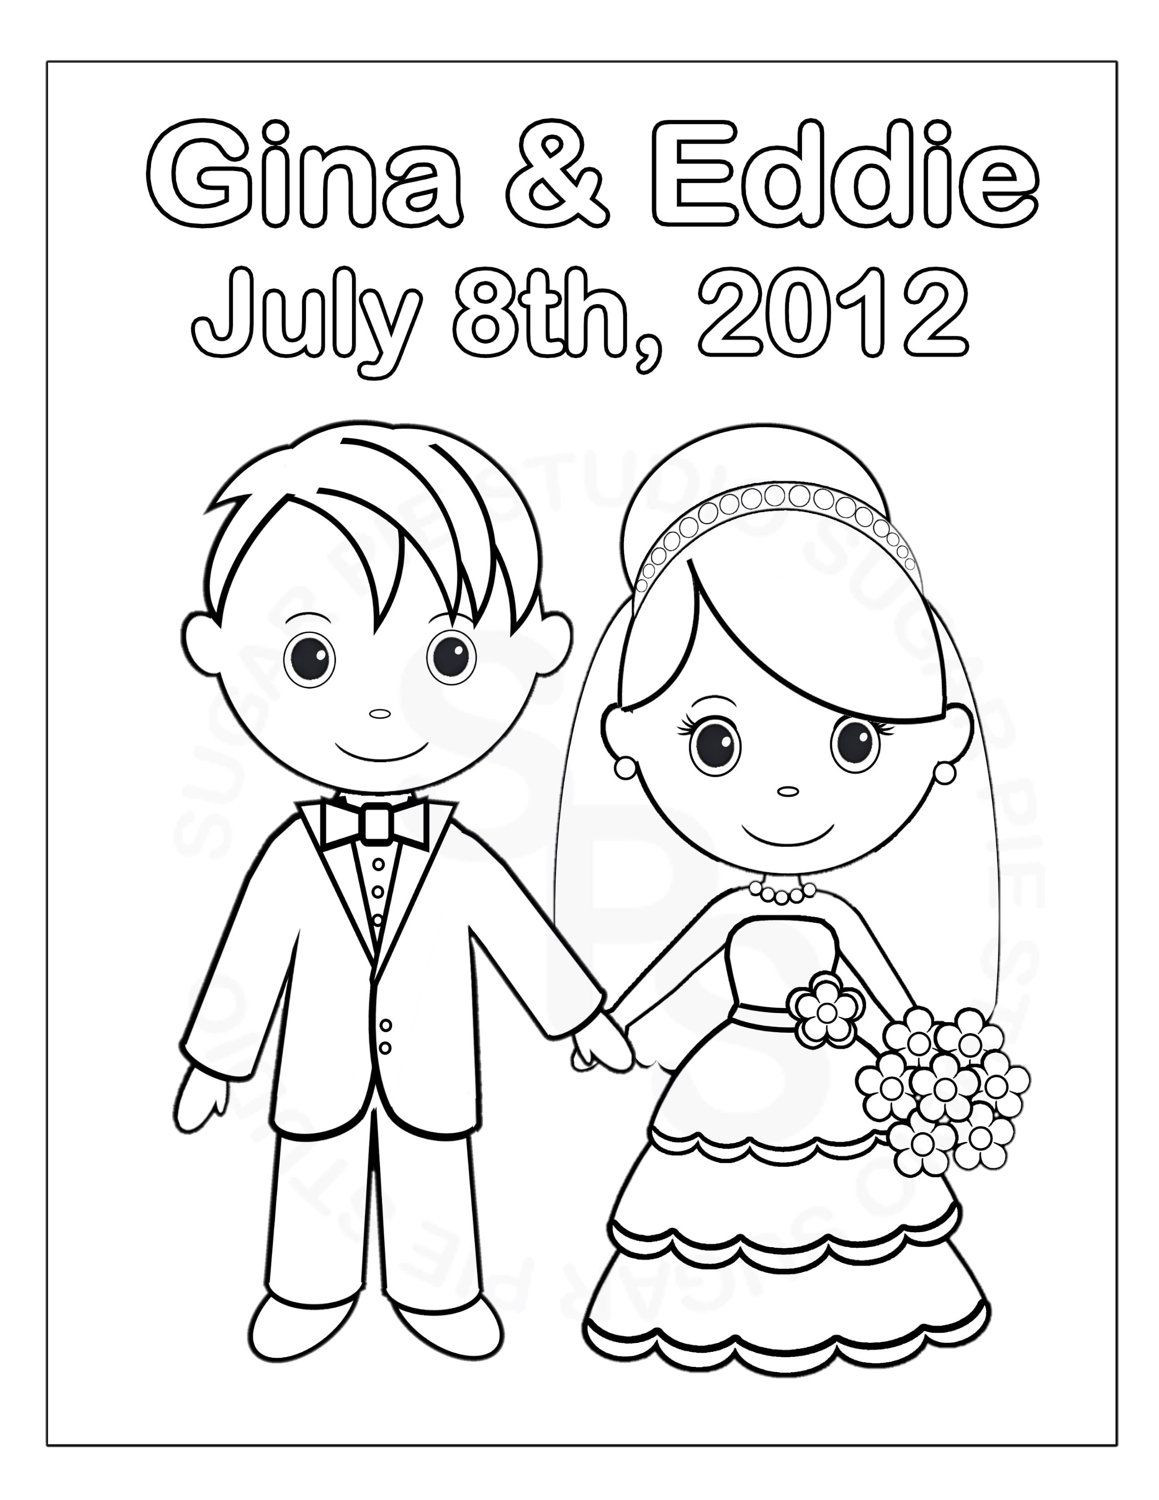 Kids Wedding Coloring Book
 Pin by Jacqueline Goh on Wedding